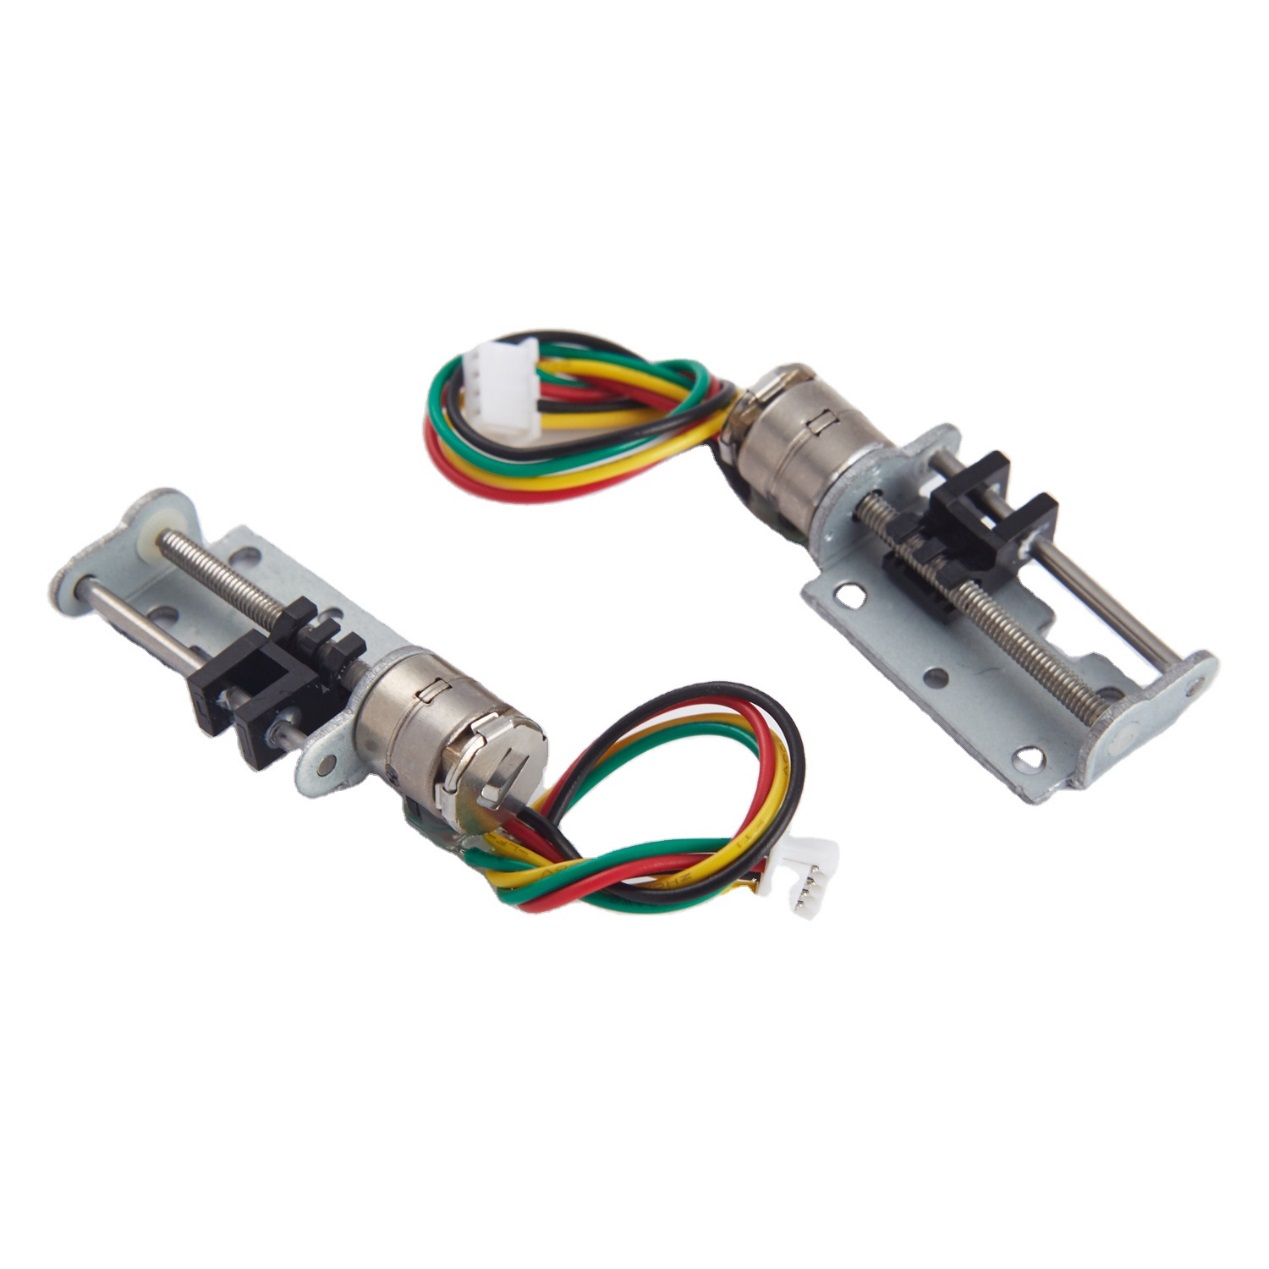 Micro Stepper Motor With Lead Screw, Precision Stepper Motor Long Linear screw slider with Bracket ATM-SM0807 Featured Image